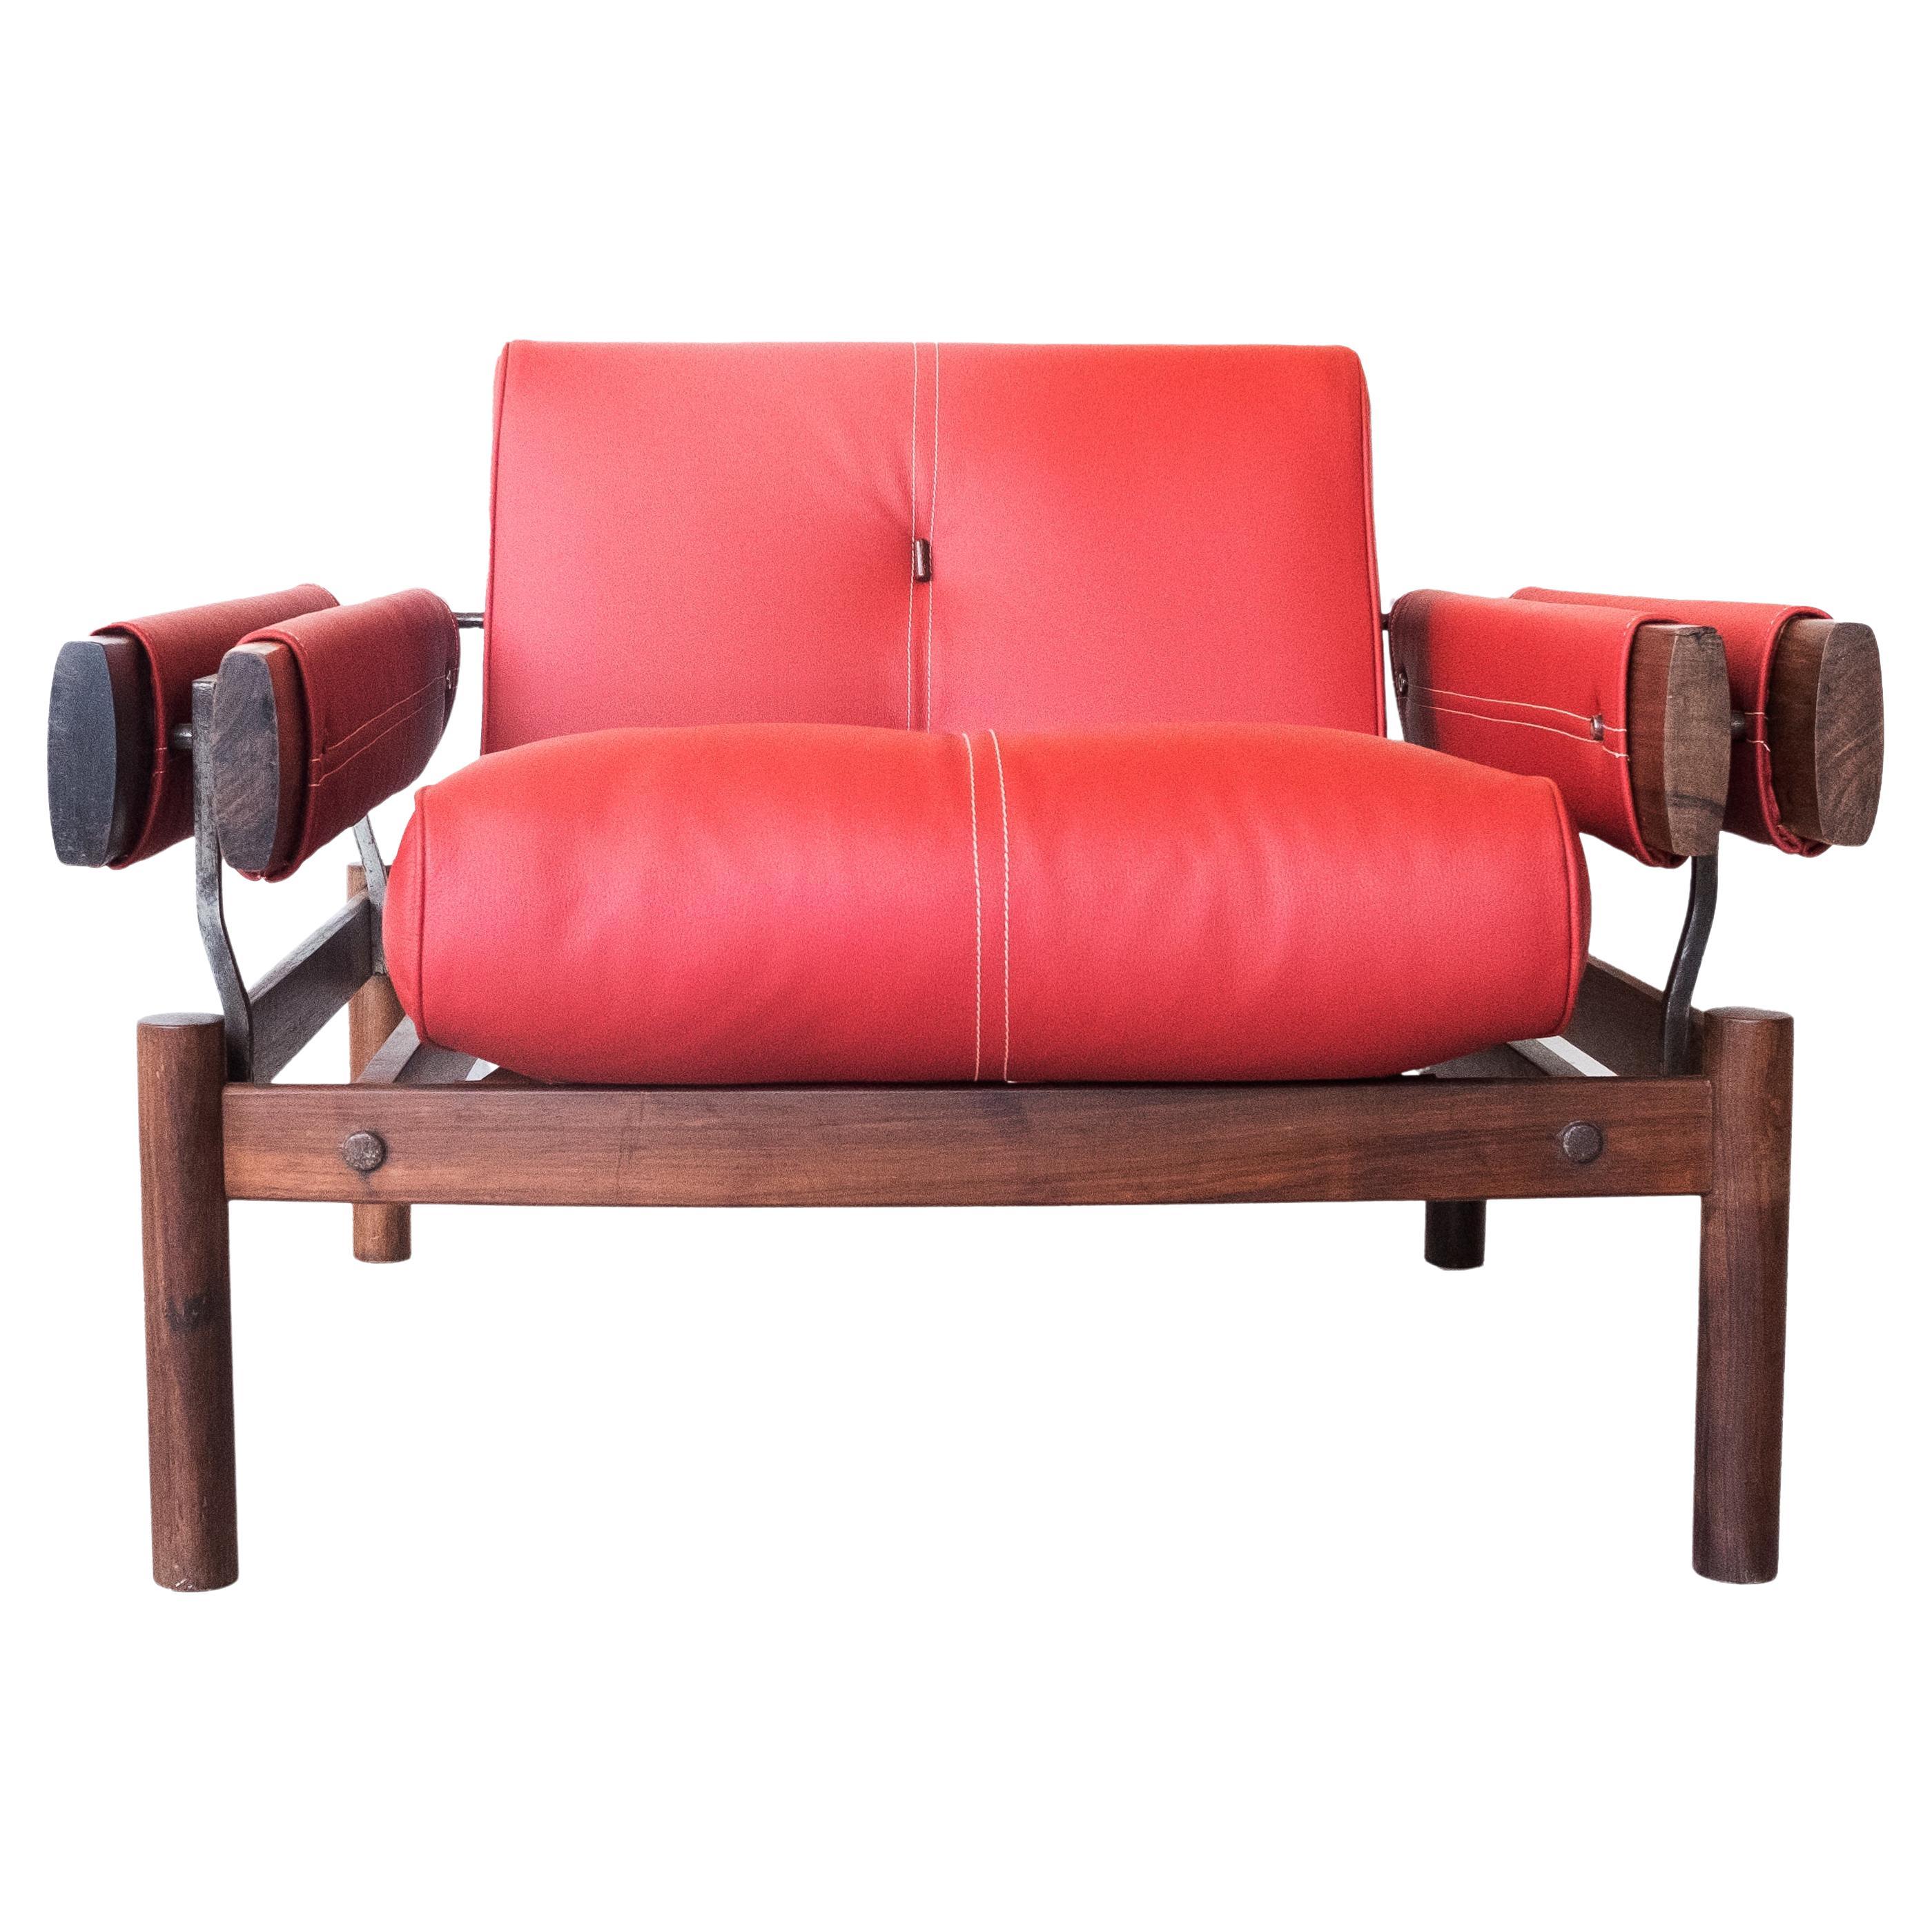 Percival Lafer, Midcentury MP-19 Armchairs, Brazil   For Sale